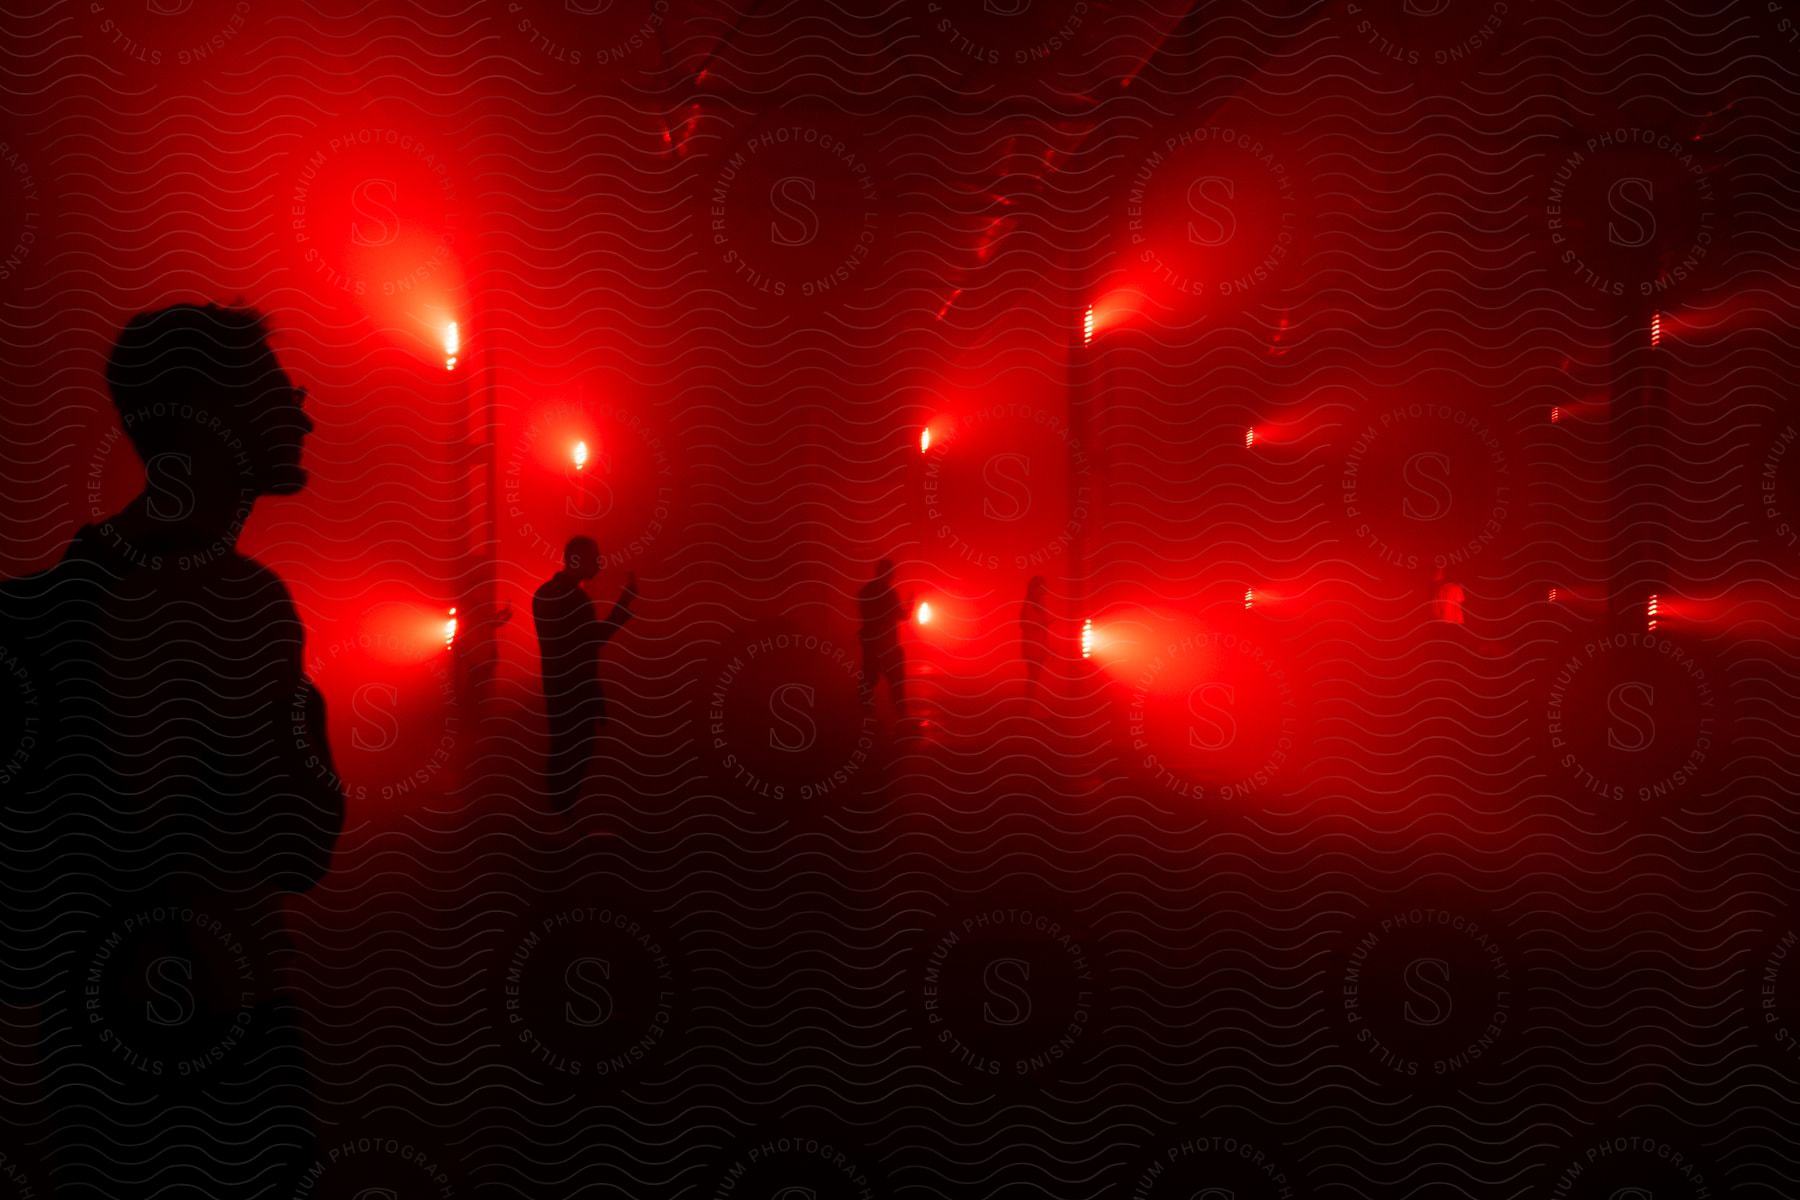 A small group of people are standing in a dimly lit warehouse with red light coming through the windows